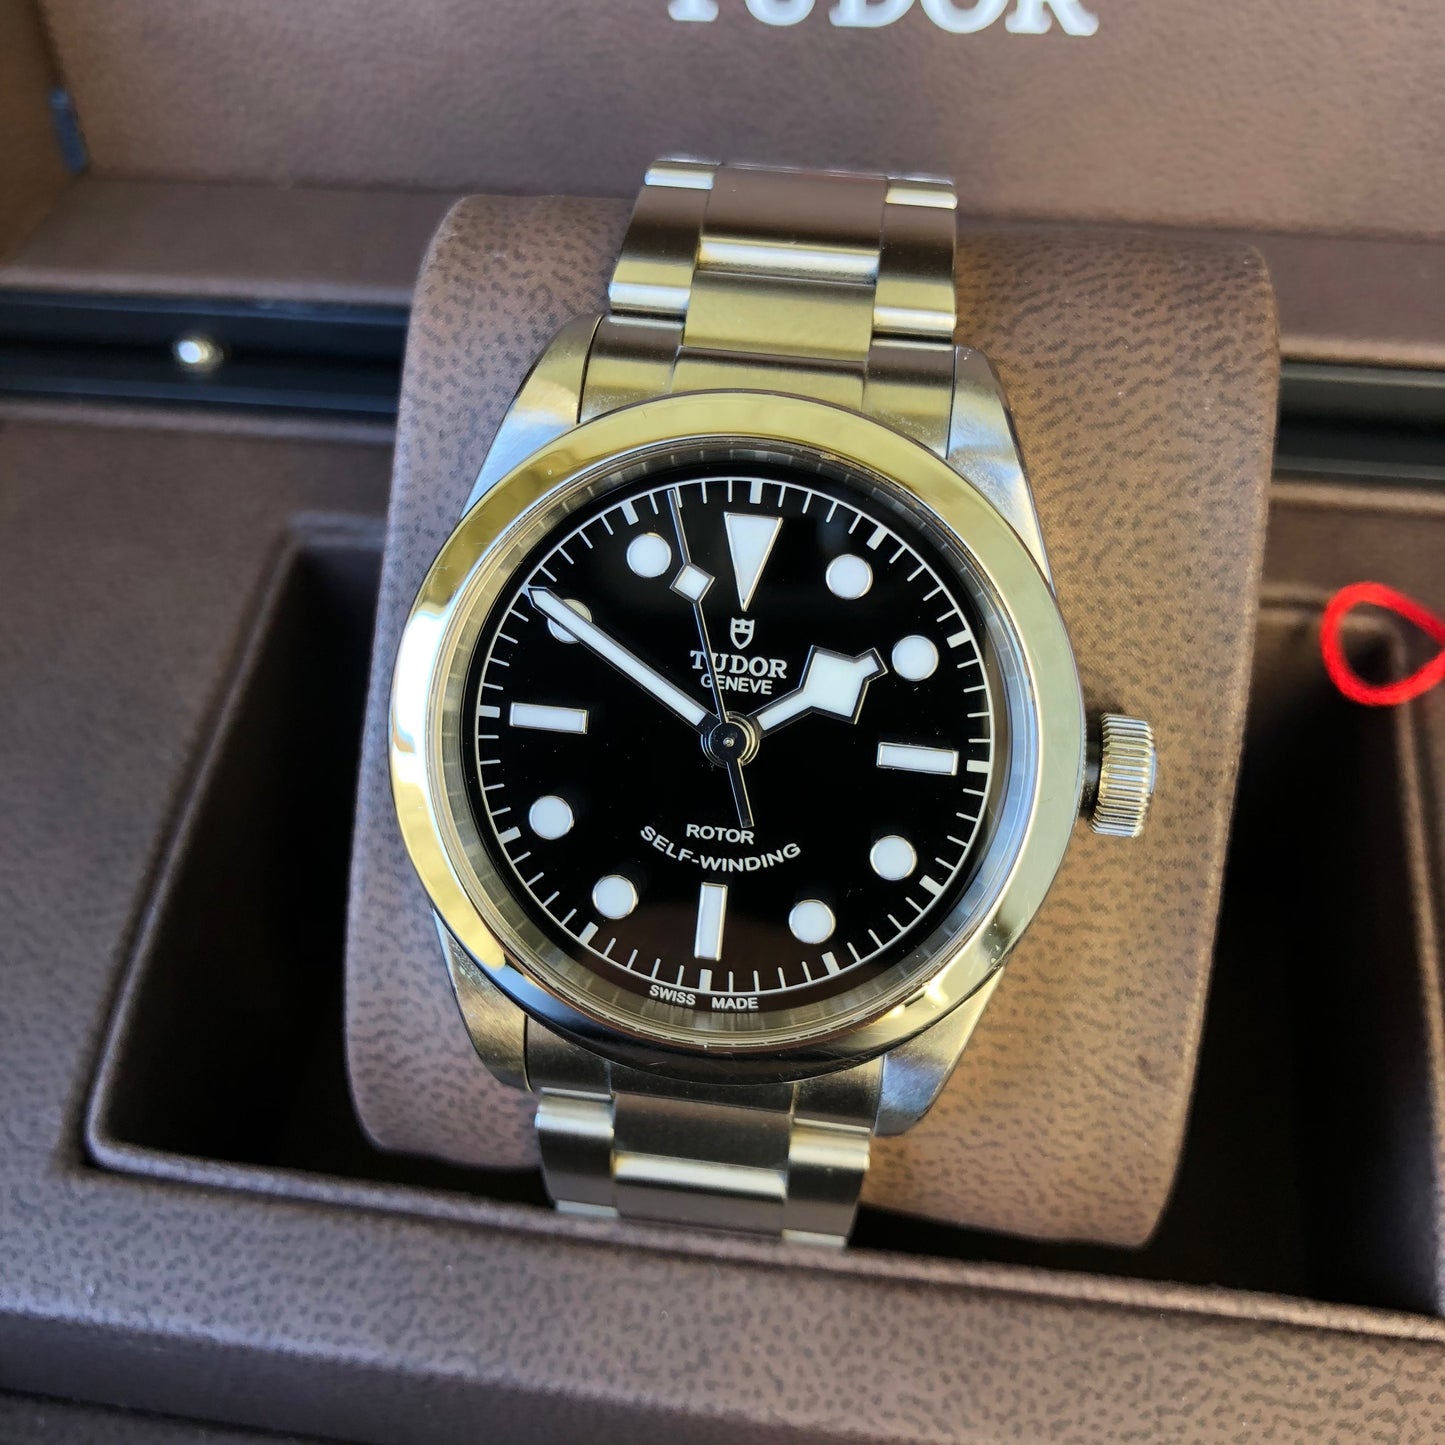 Tudor Black Bay 79500 Stainless Steel 36 Black Dial Automatic Wristwatch Box Papers Circa 2016 - Hashtag Watch Company